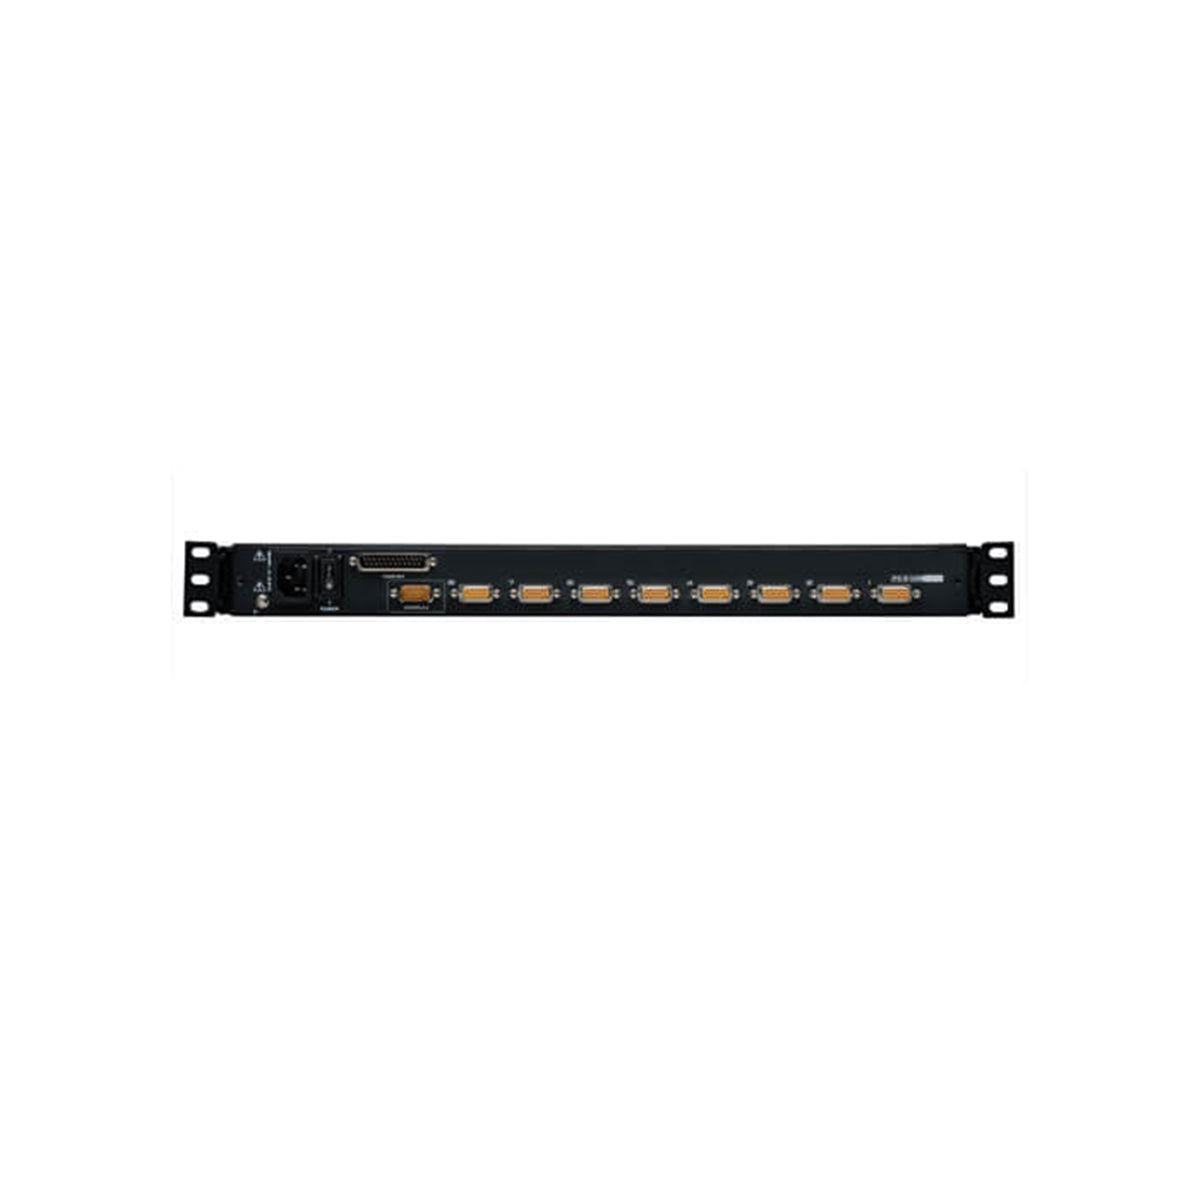 Tripp Lite B020-U08-19-K NetDirector 8-Port 1U Rack-Mount Console KVM Switch with 19 Inch LCD and 8 PS2/USB Combo Cables